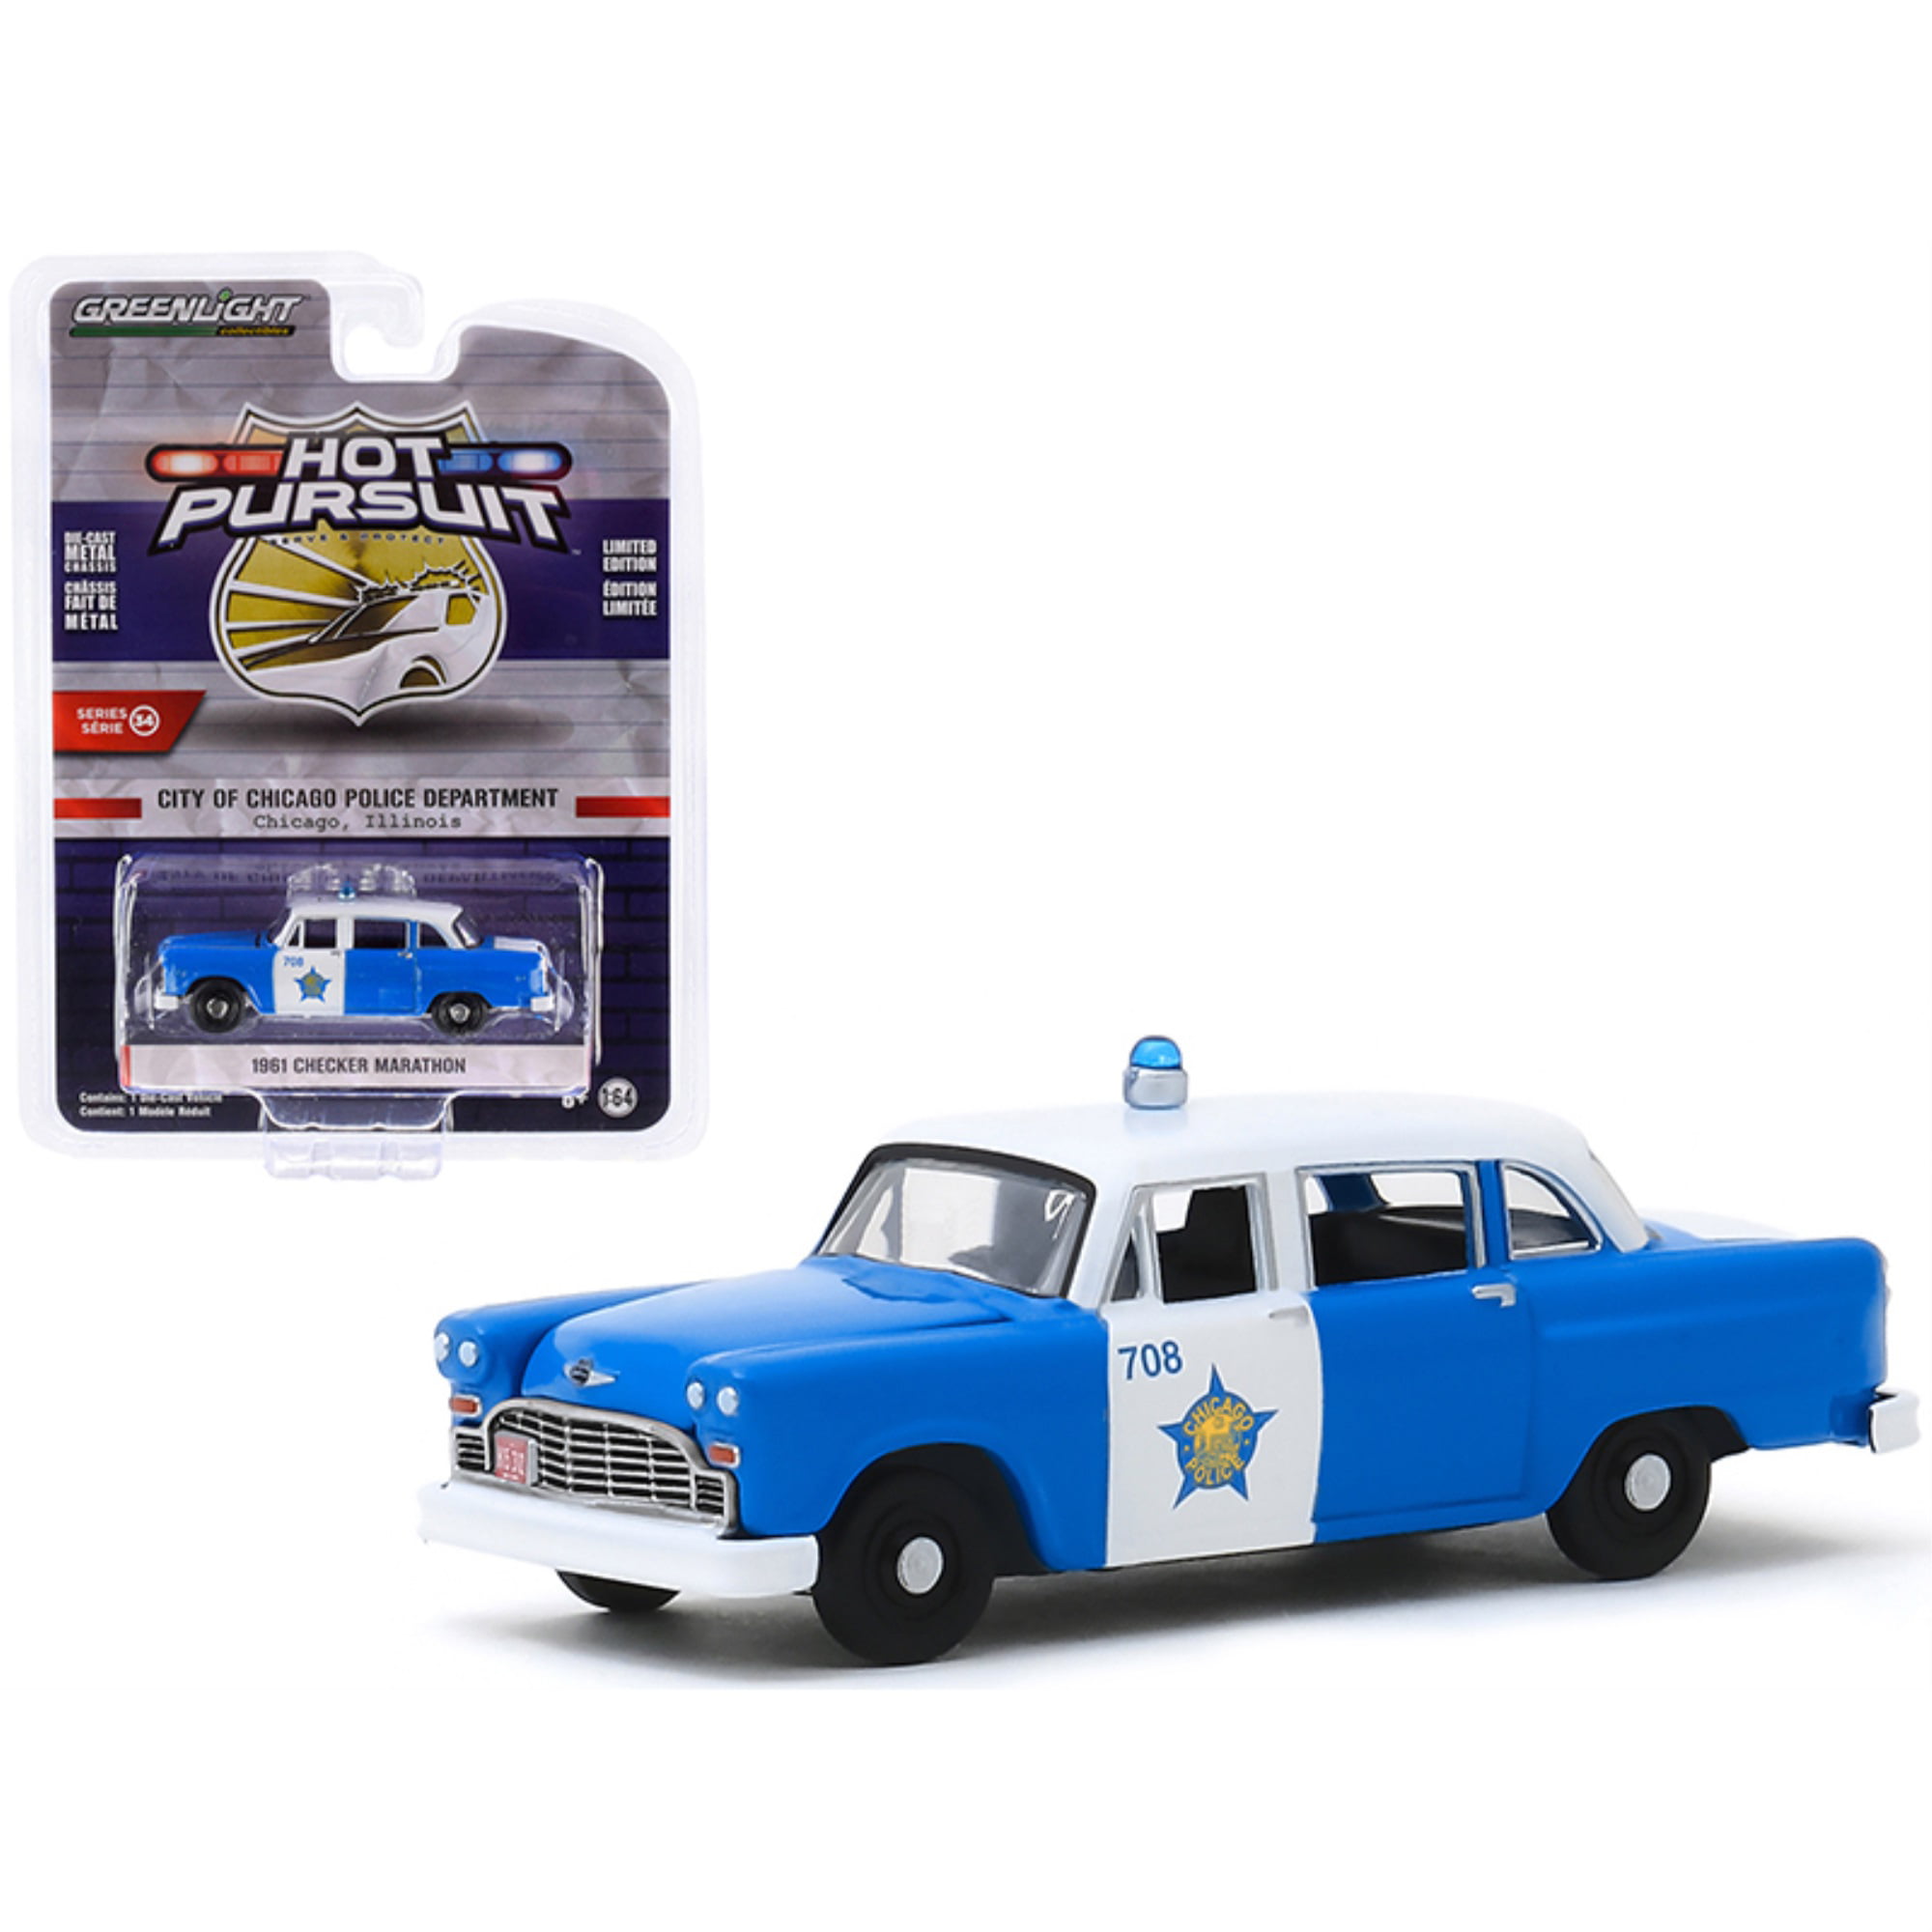 Greenlight Holt Pursuit 1953 Studebaker Indiana State Police